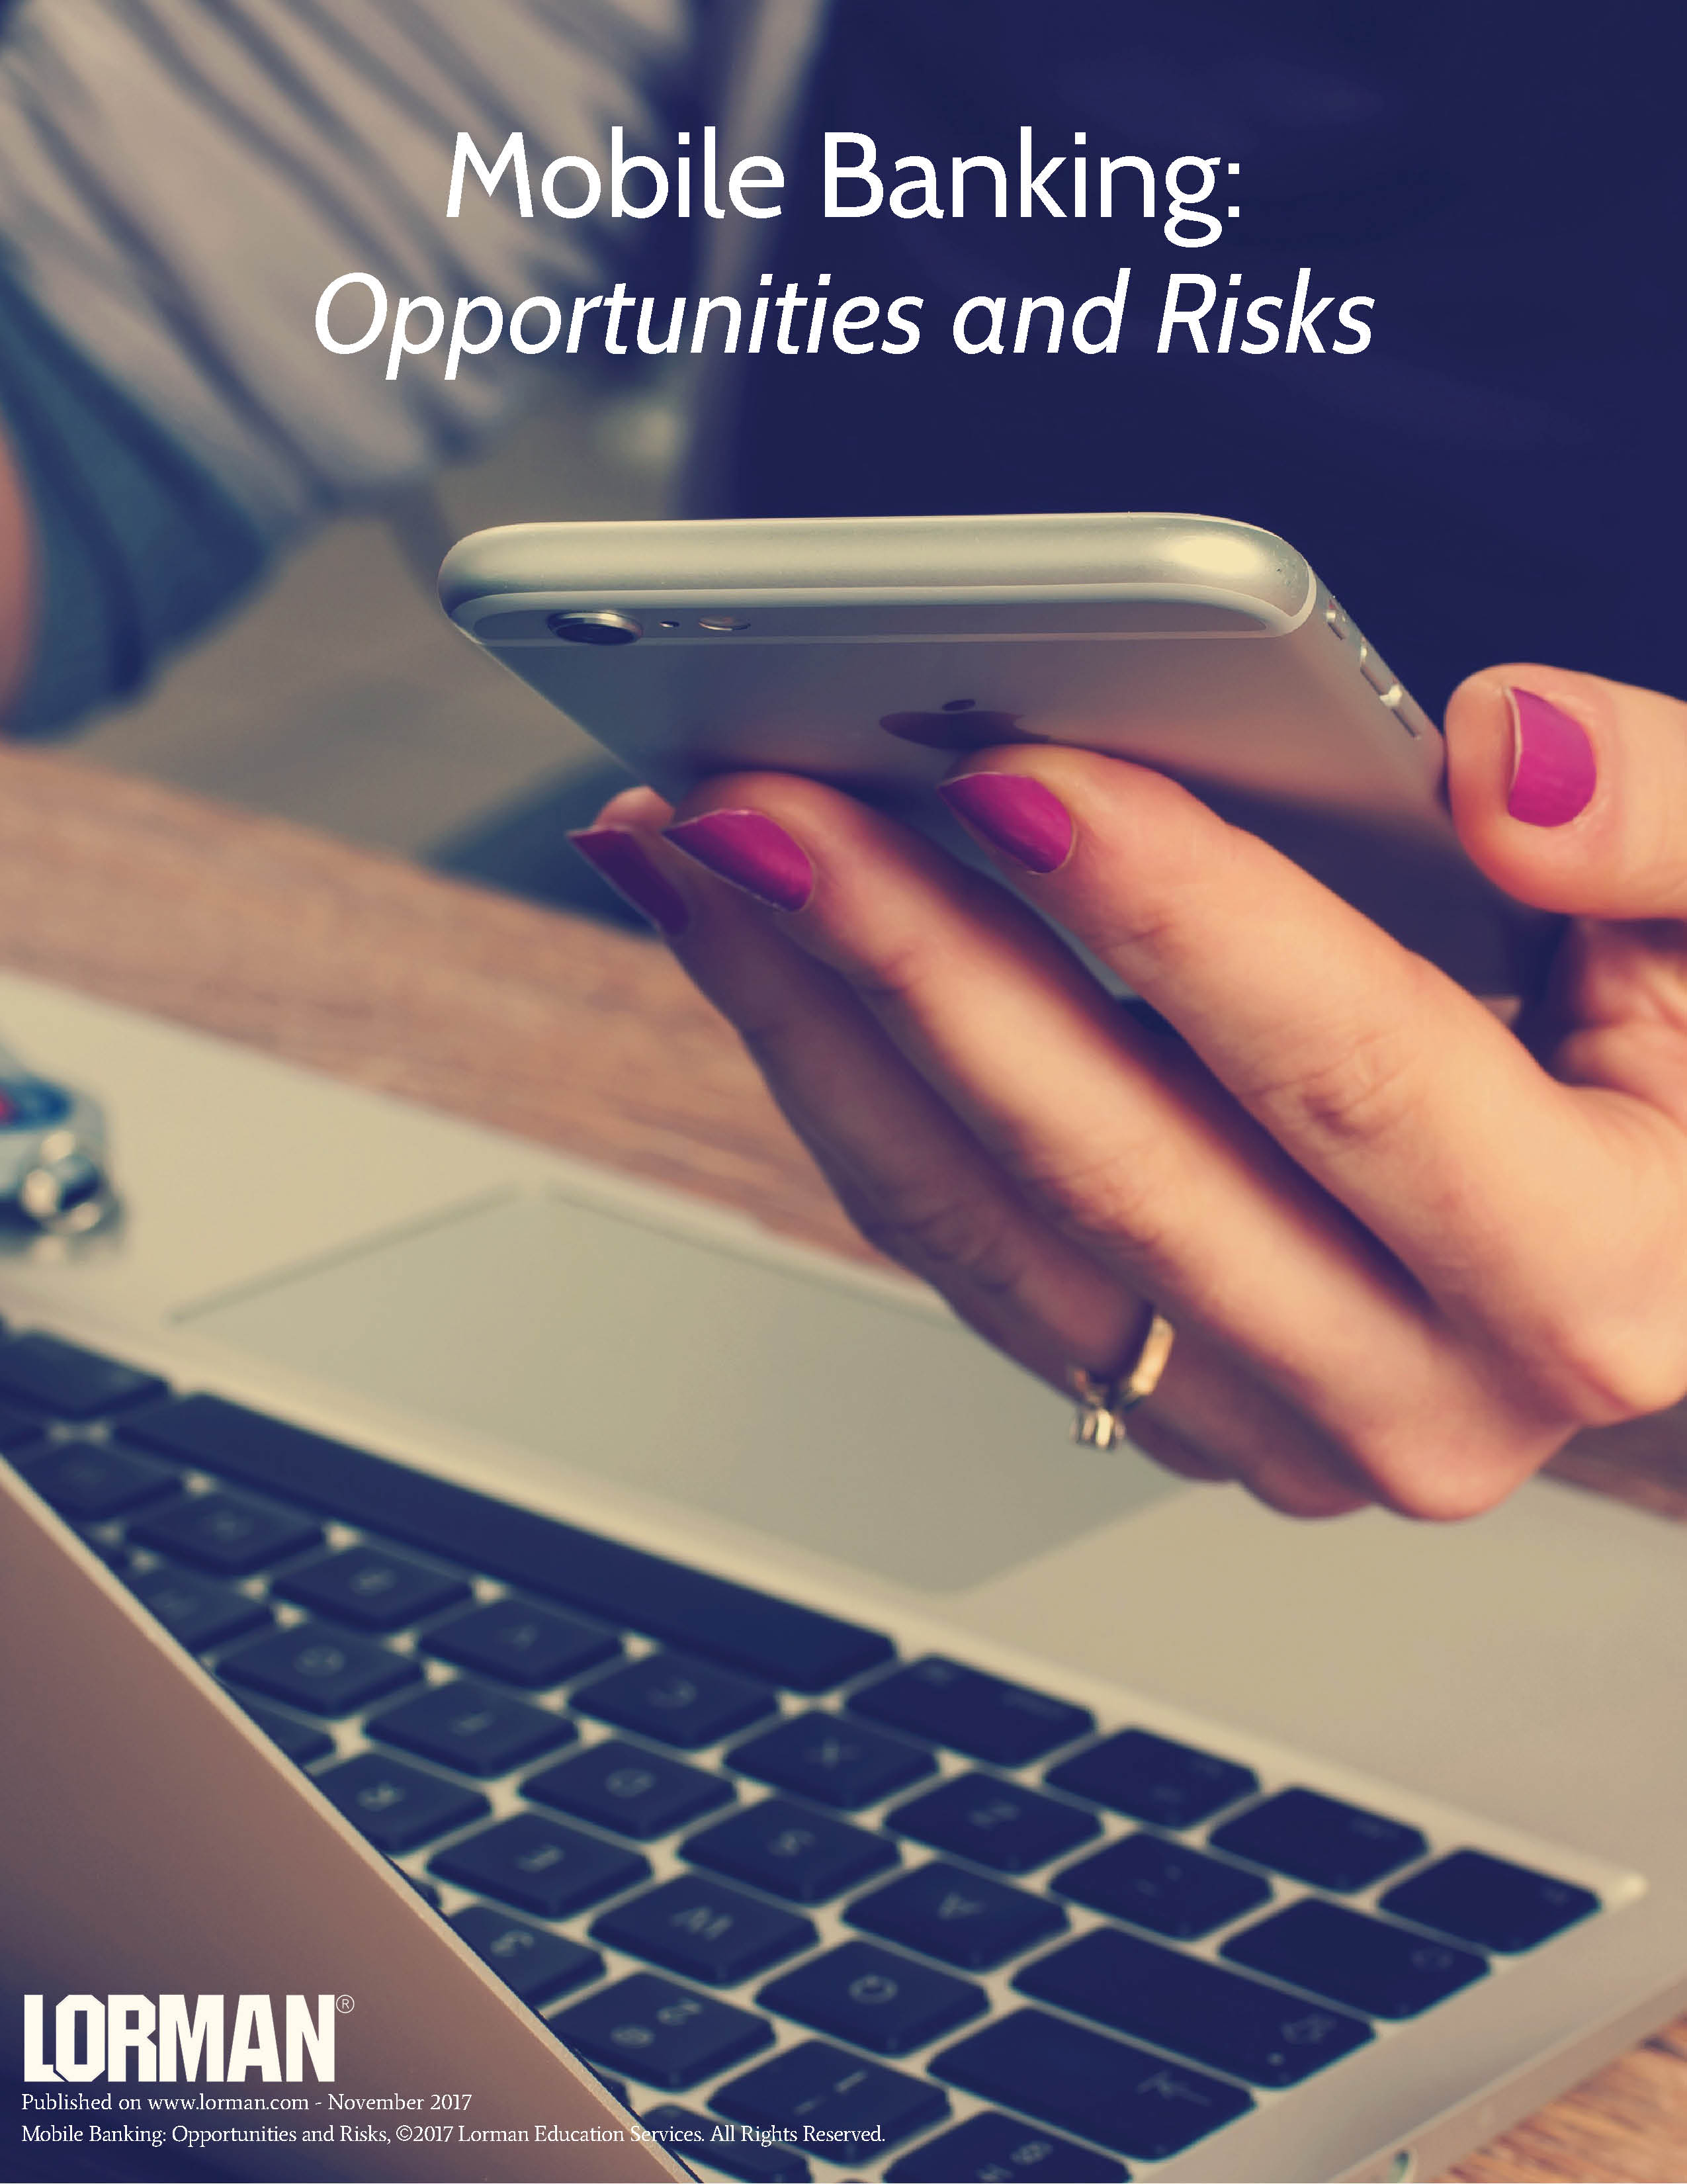 Mobile Banking: Opportunities and Risks